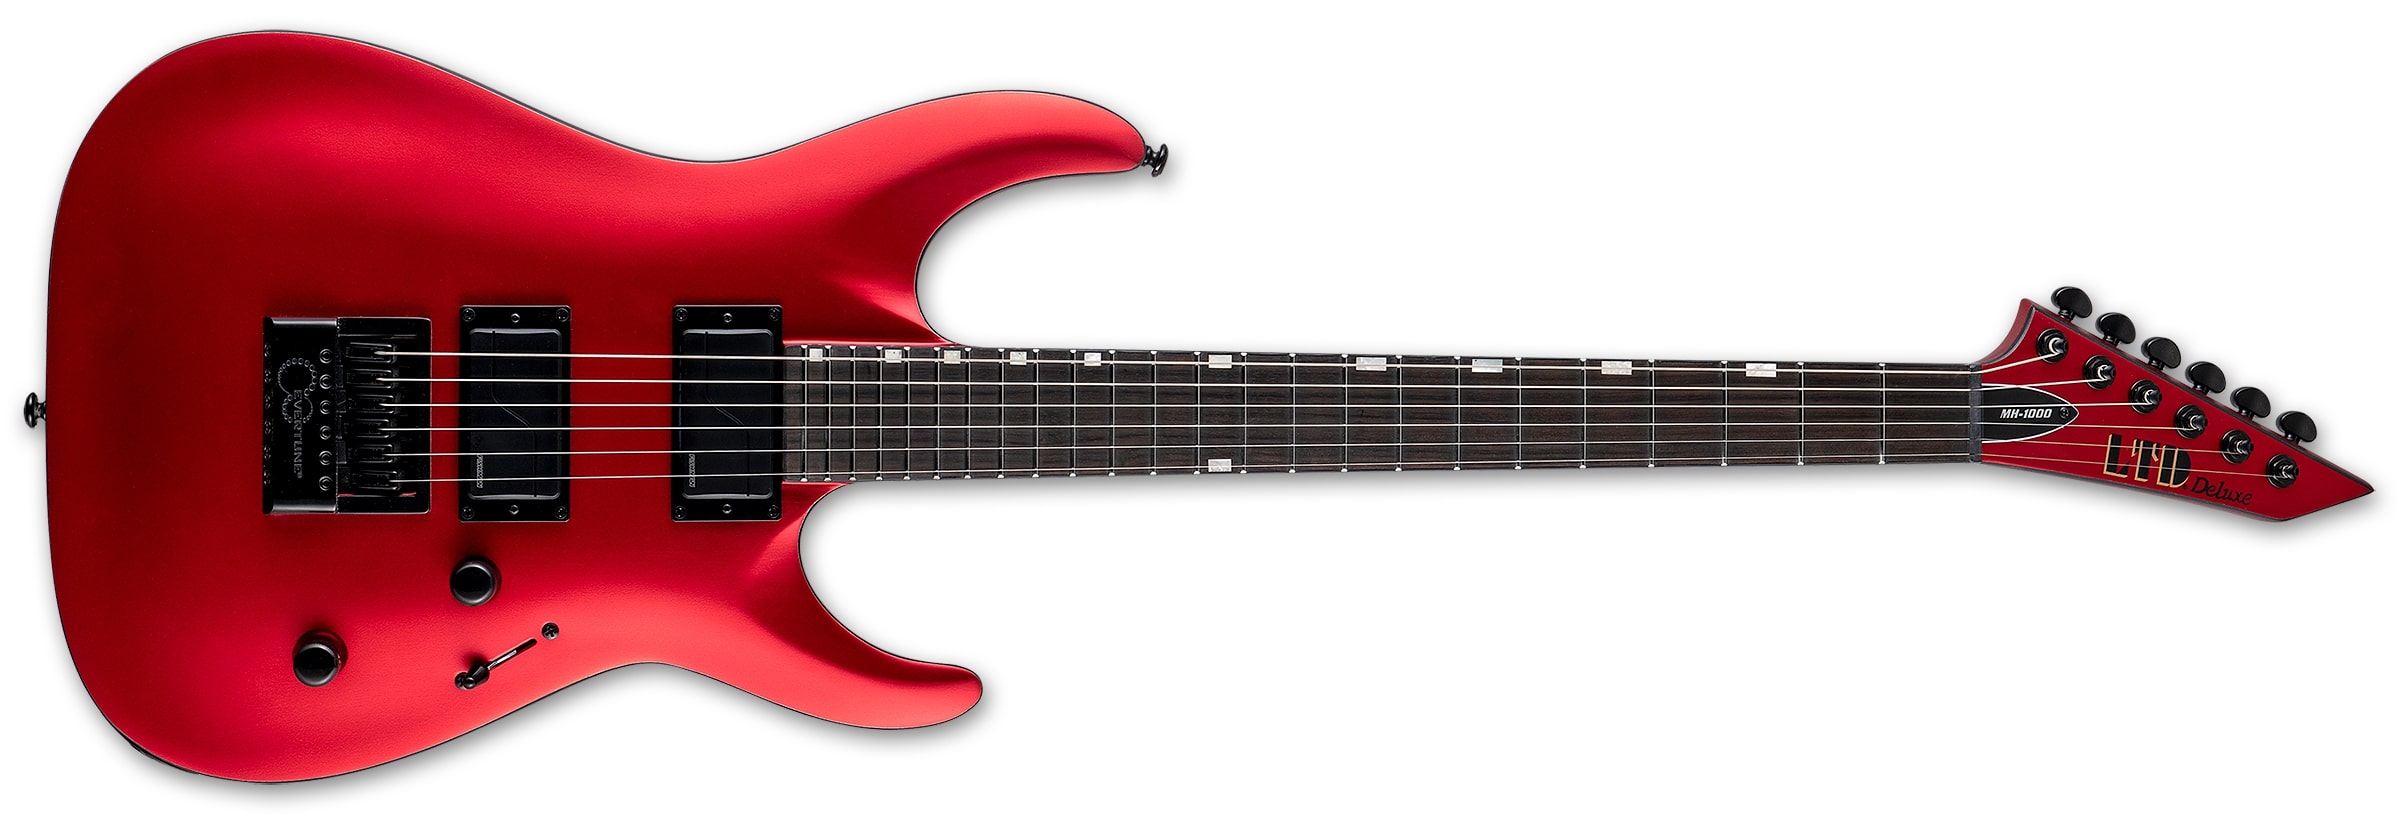 LTD MH-1000 EverTune Electric Guitar, Candy Apple Red Satin LMH1000ETCARS